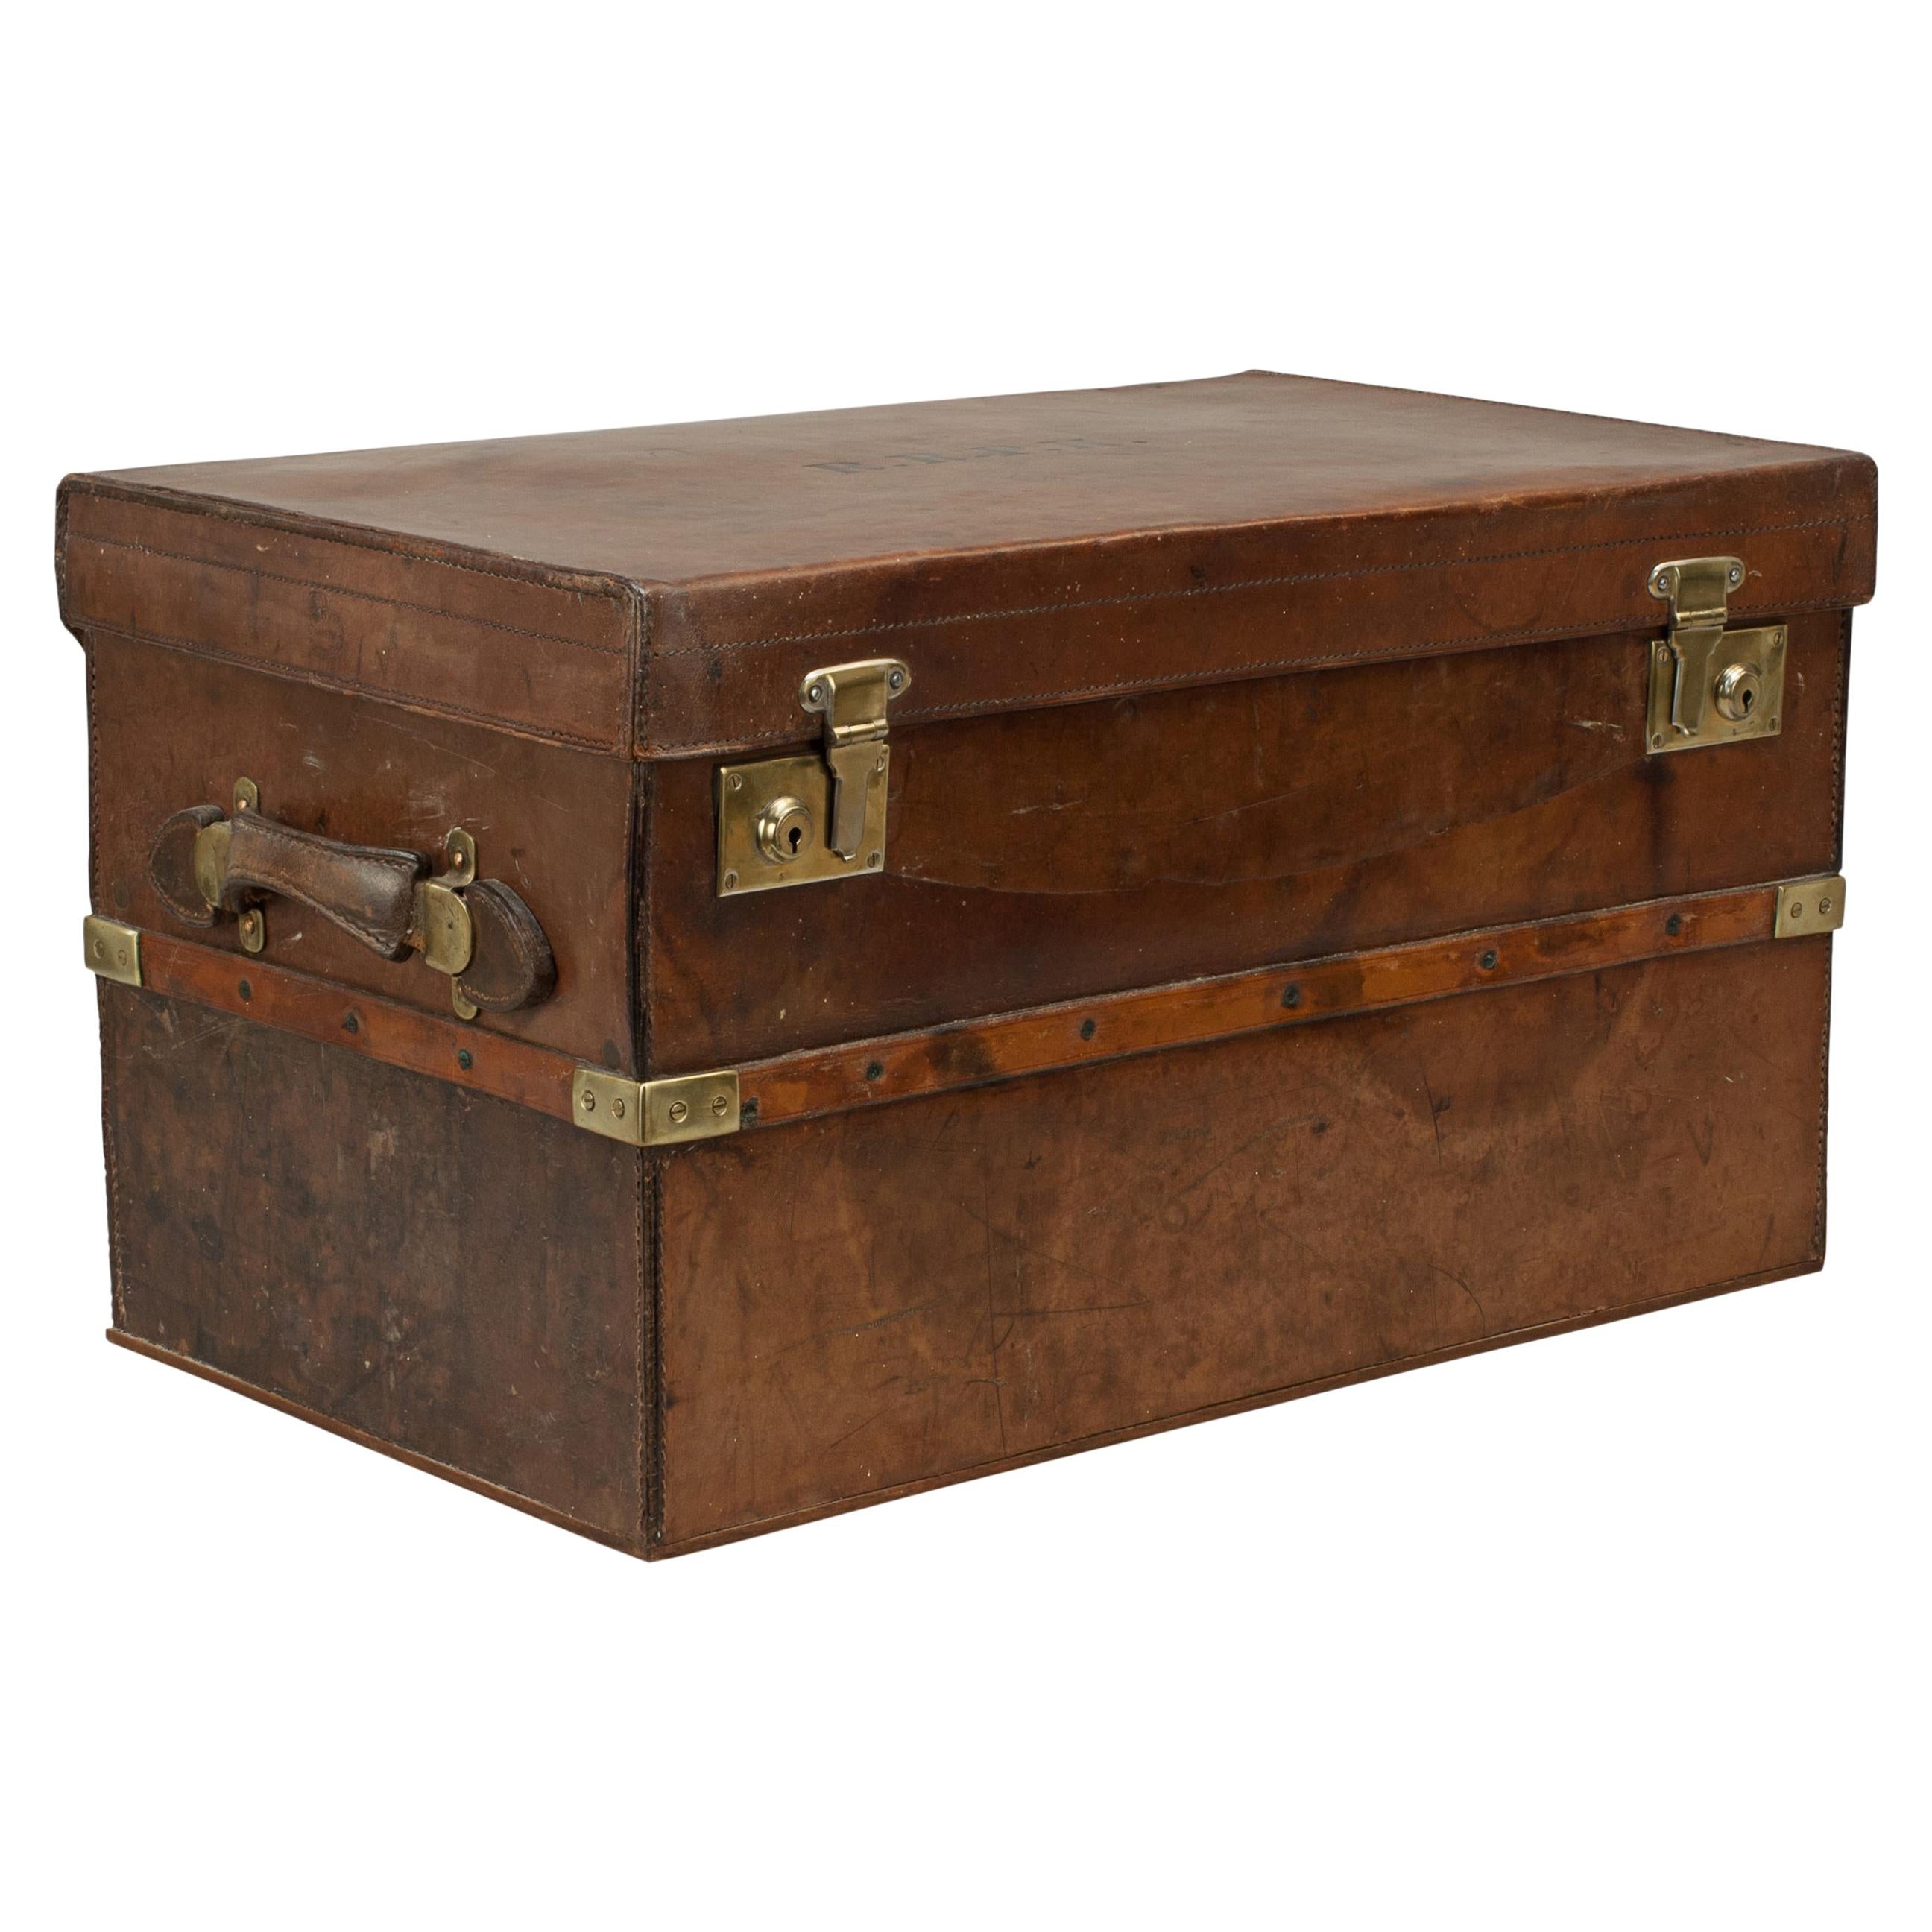 Antique Brass Bound, Leather Travelling Trunk by Webb & Bryant